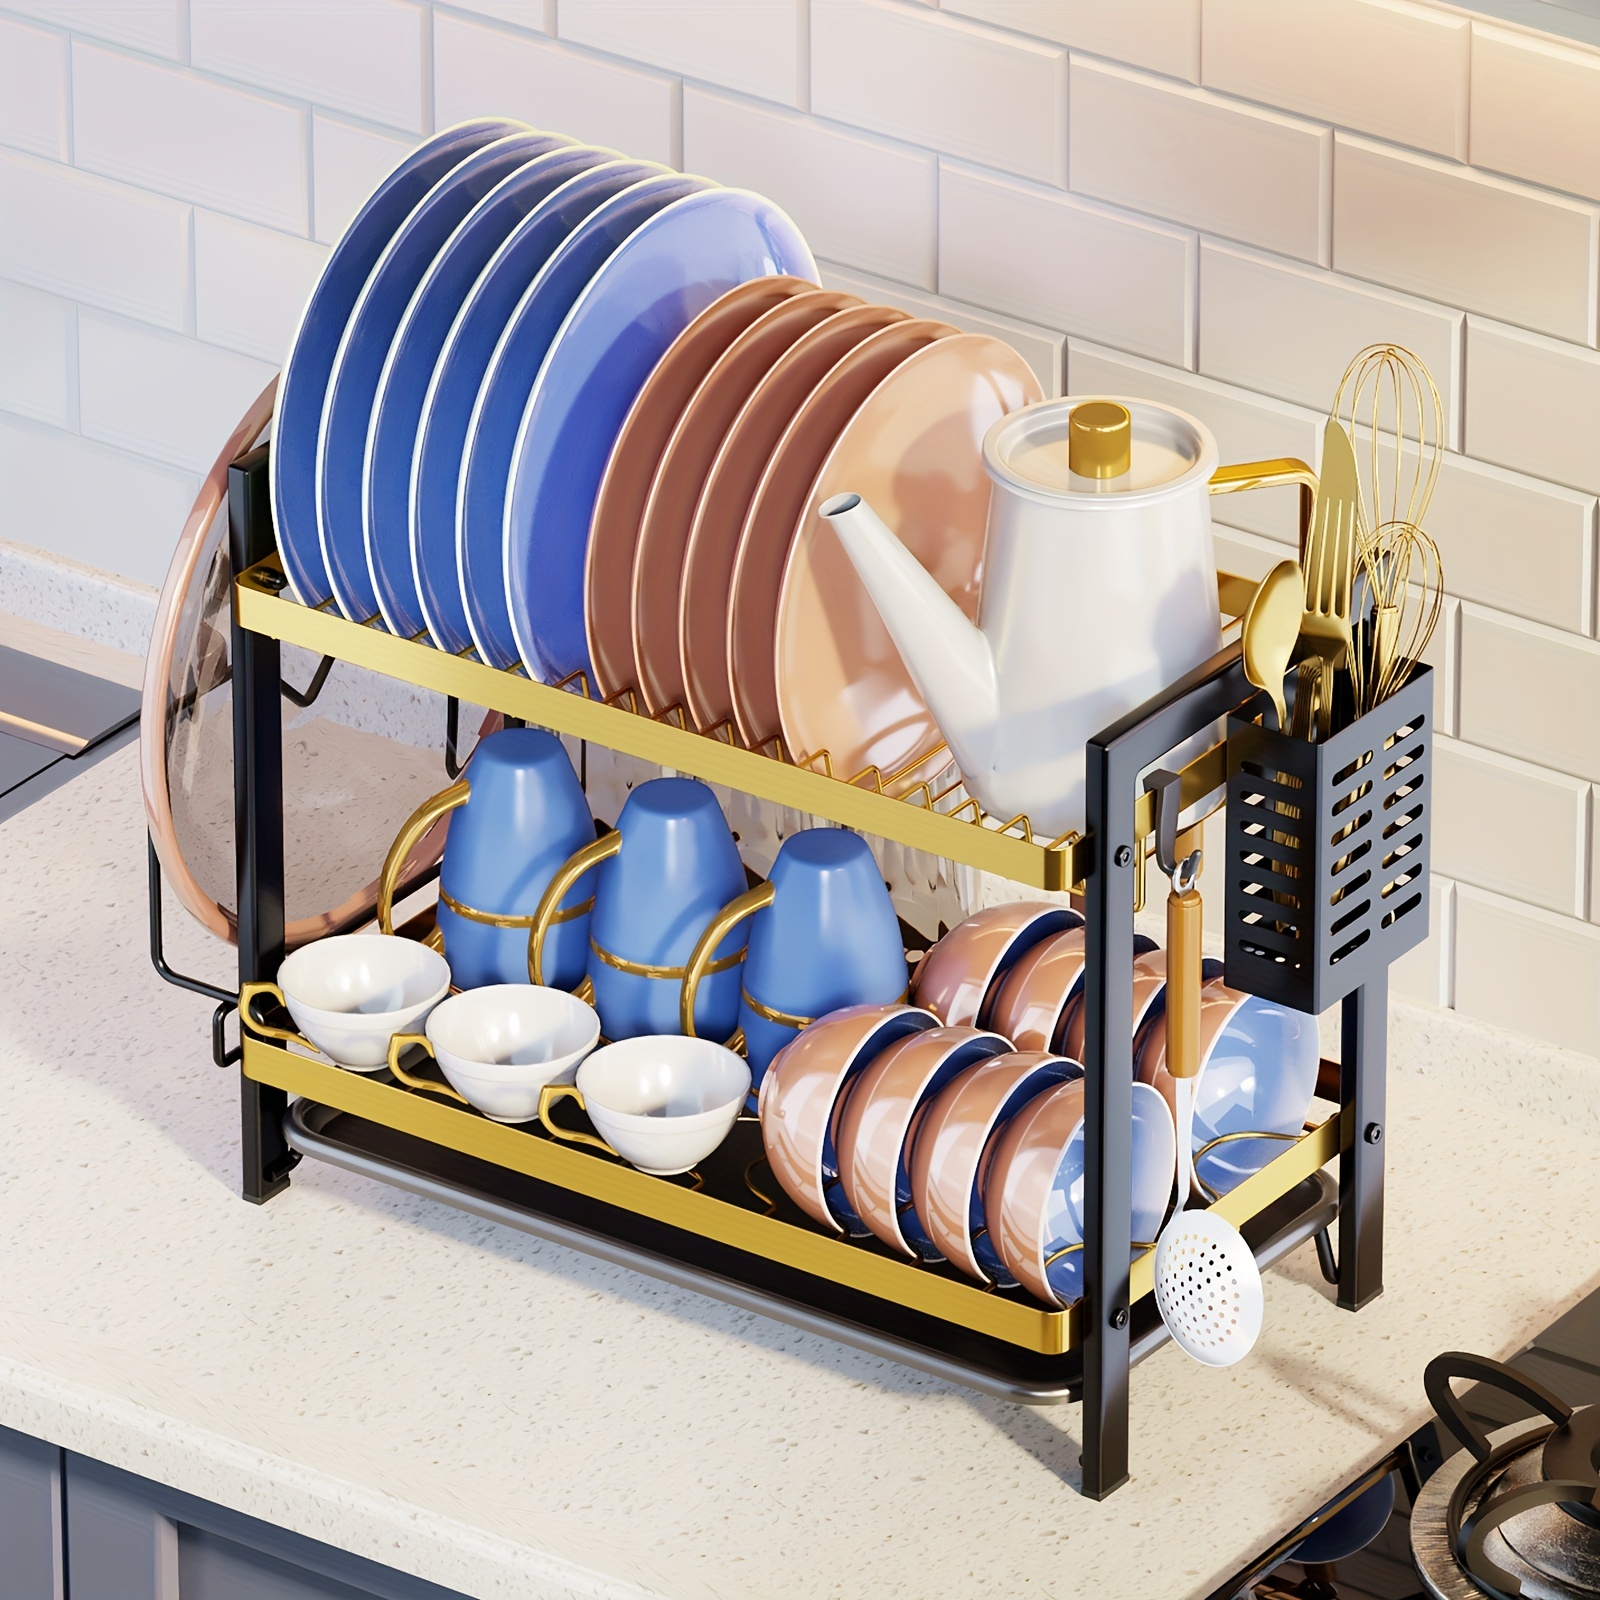 2-Tier Gold Dish Drying Rack Bowl Plate Drainer with Drainboard Kitchen  Counter Organizer Chopsticks Storage